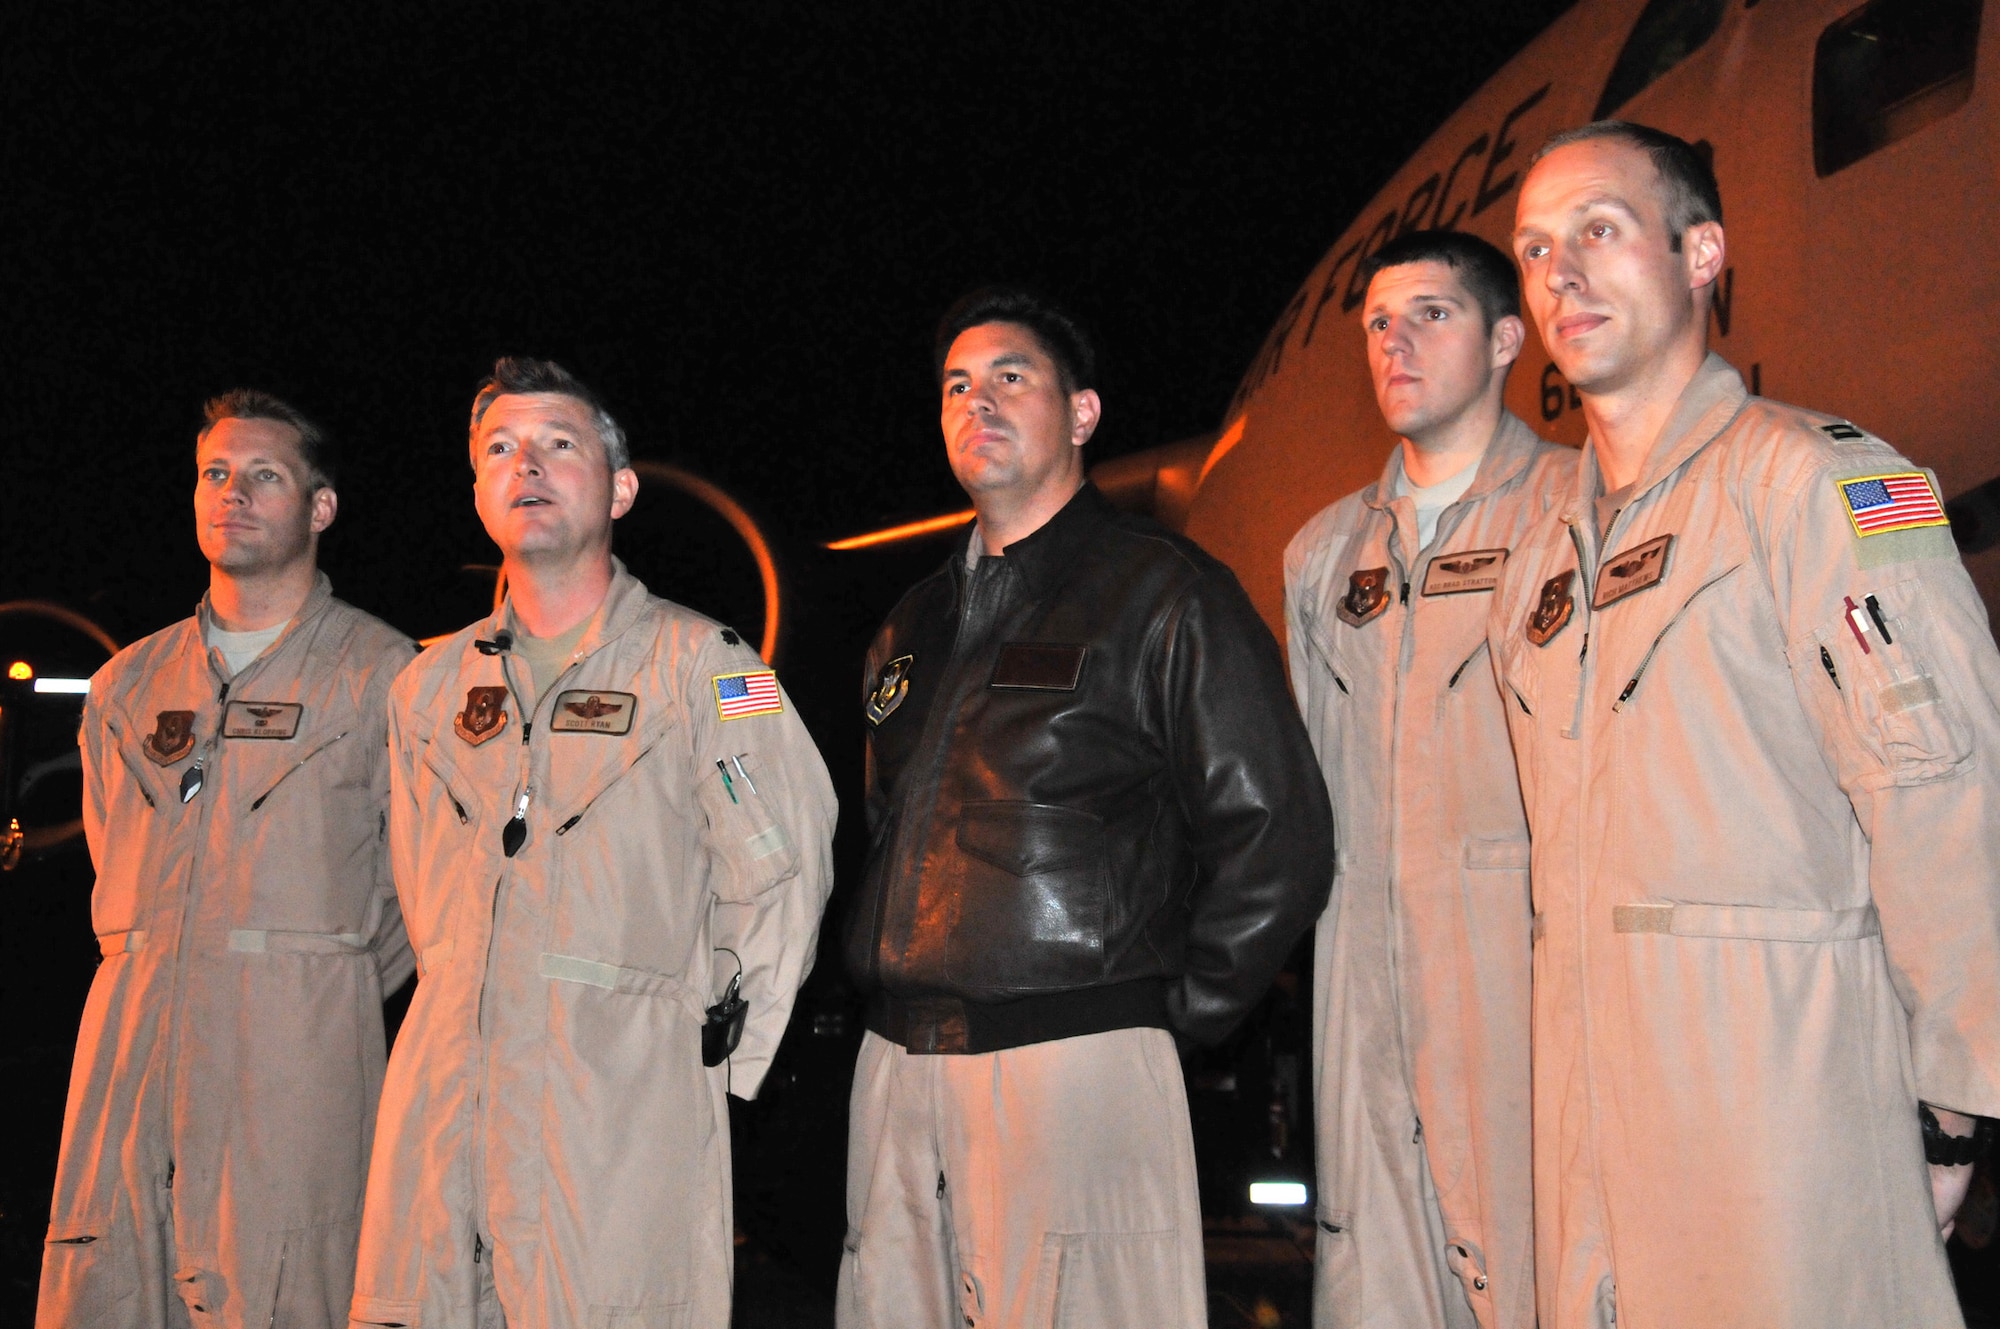 Air Force Reservists from the 97th Airlift Squadron, McChord Field, Wash., (from left to right) Maj. Chris Klopping, Lt. Col. Scott Ryan, Master Sgt. Jeremy Parker, Airman 1st Class Bradley Stratton, and Capt. Richard Matthews, stand in front of the C-17 Globemaster III that transported precious cargo in the form of U.S. Secretary of State Hillary Rodham Clinton to Tripoli, Libya earlier this week. The crew finally landed here at McChord Field, Oct. 20, 2011. An active-duty crewmember from the 62nd Airlift Wing and a Raven unit from the 627th Air Base Group also supported the mission. (U.S. Air Force photo by 2nd Lt. Lori Fiorello)
